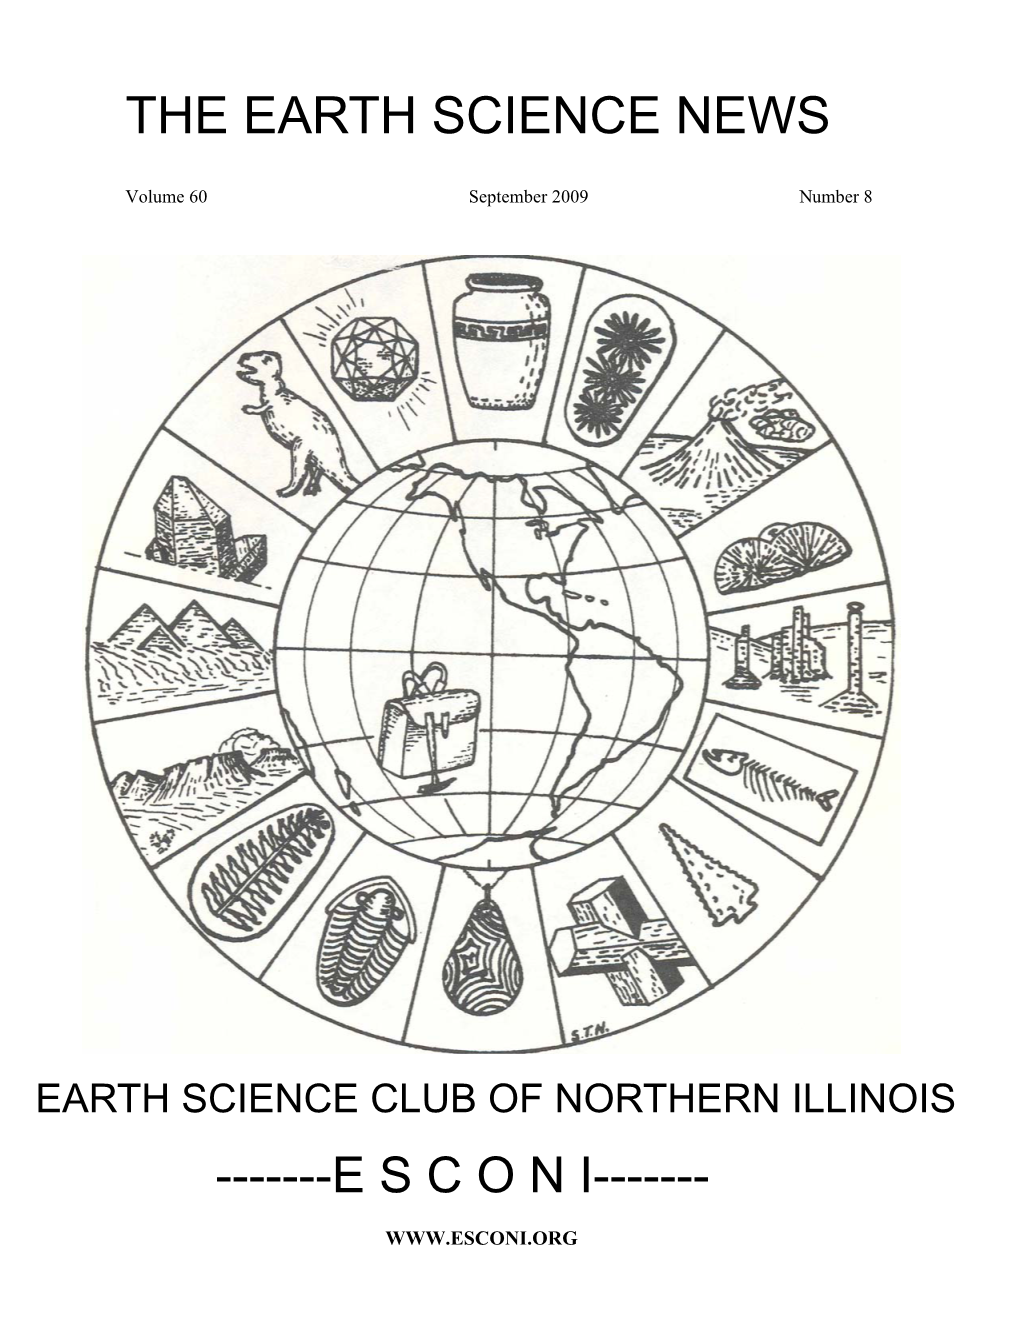 The Earth Science News